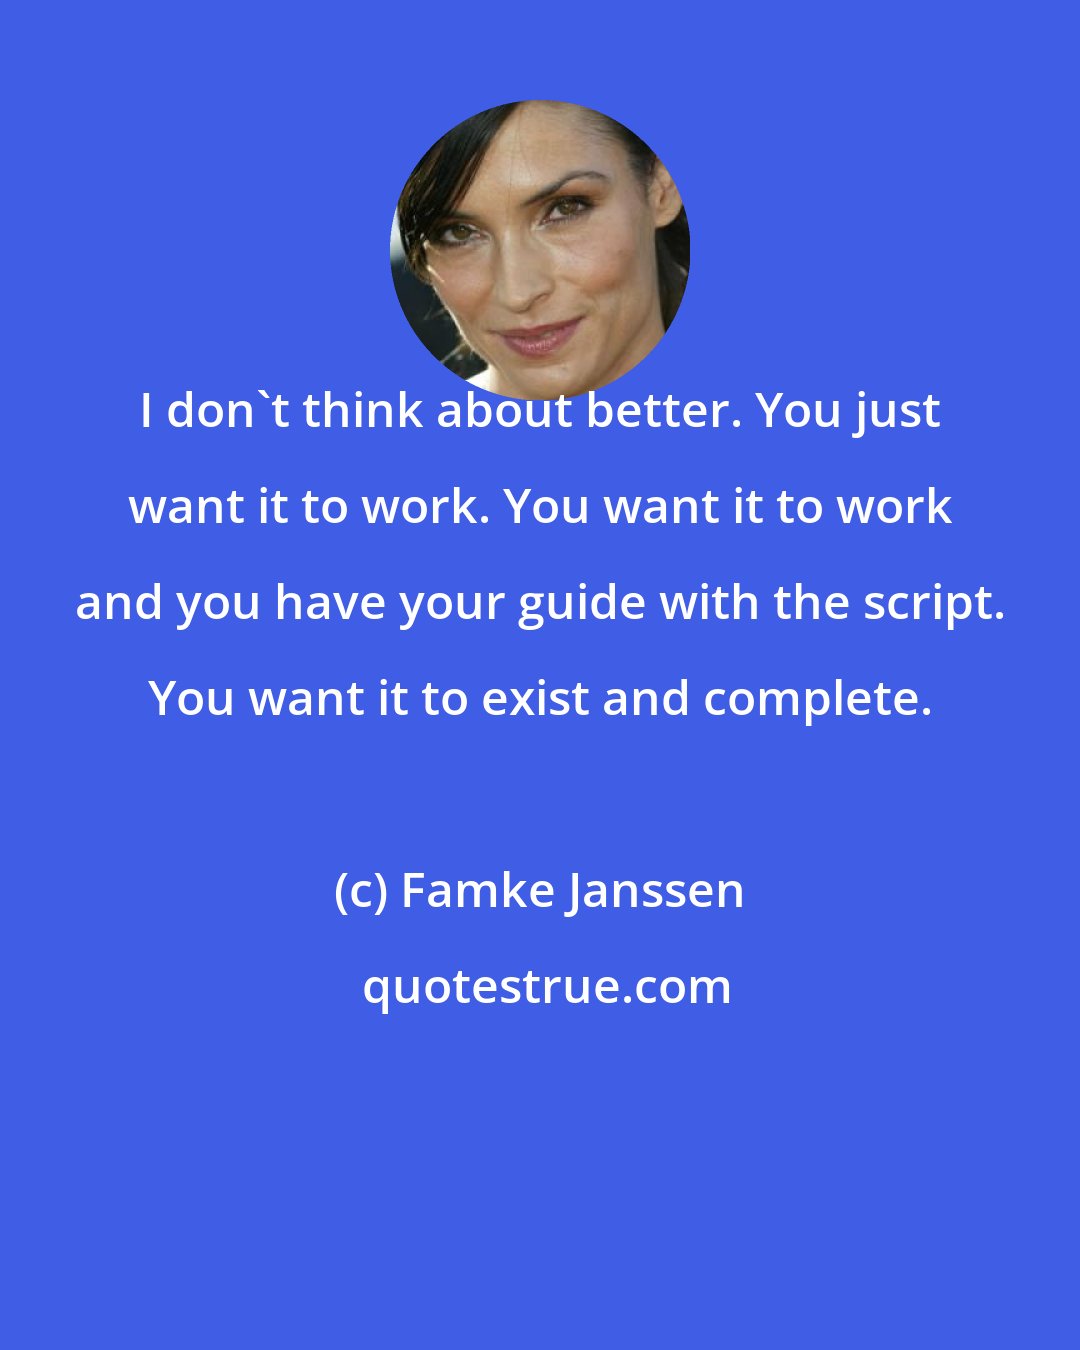 Famke Janssen: I don't think about better. You just want it to work. You want it to work and you have your guide with the script. You want it to exist and complete.